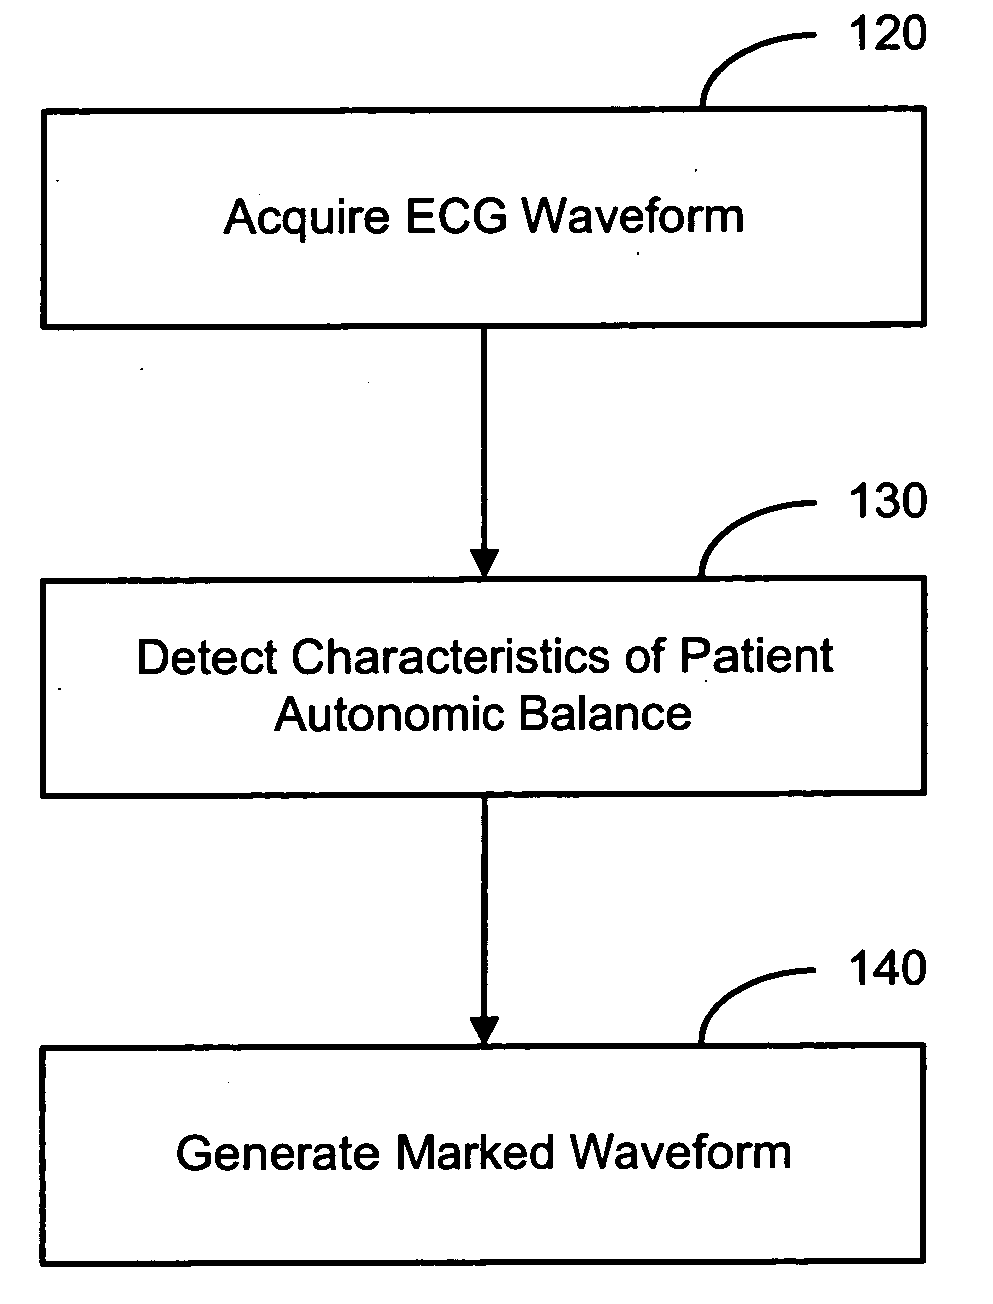 Evaluating a patient condition using autonomic balance information in implatable cardiac devices